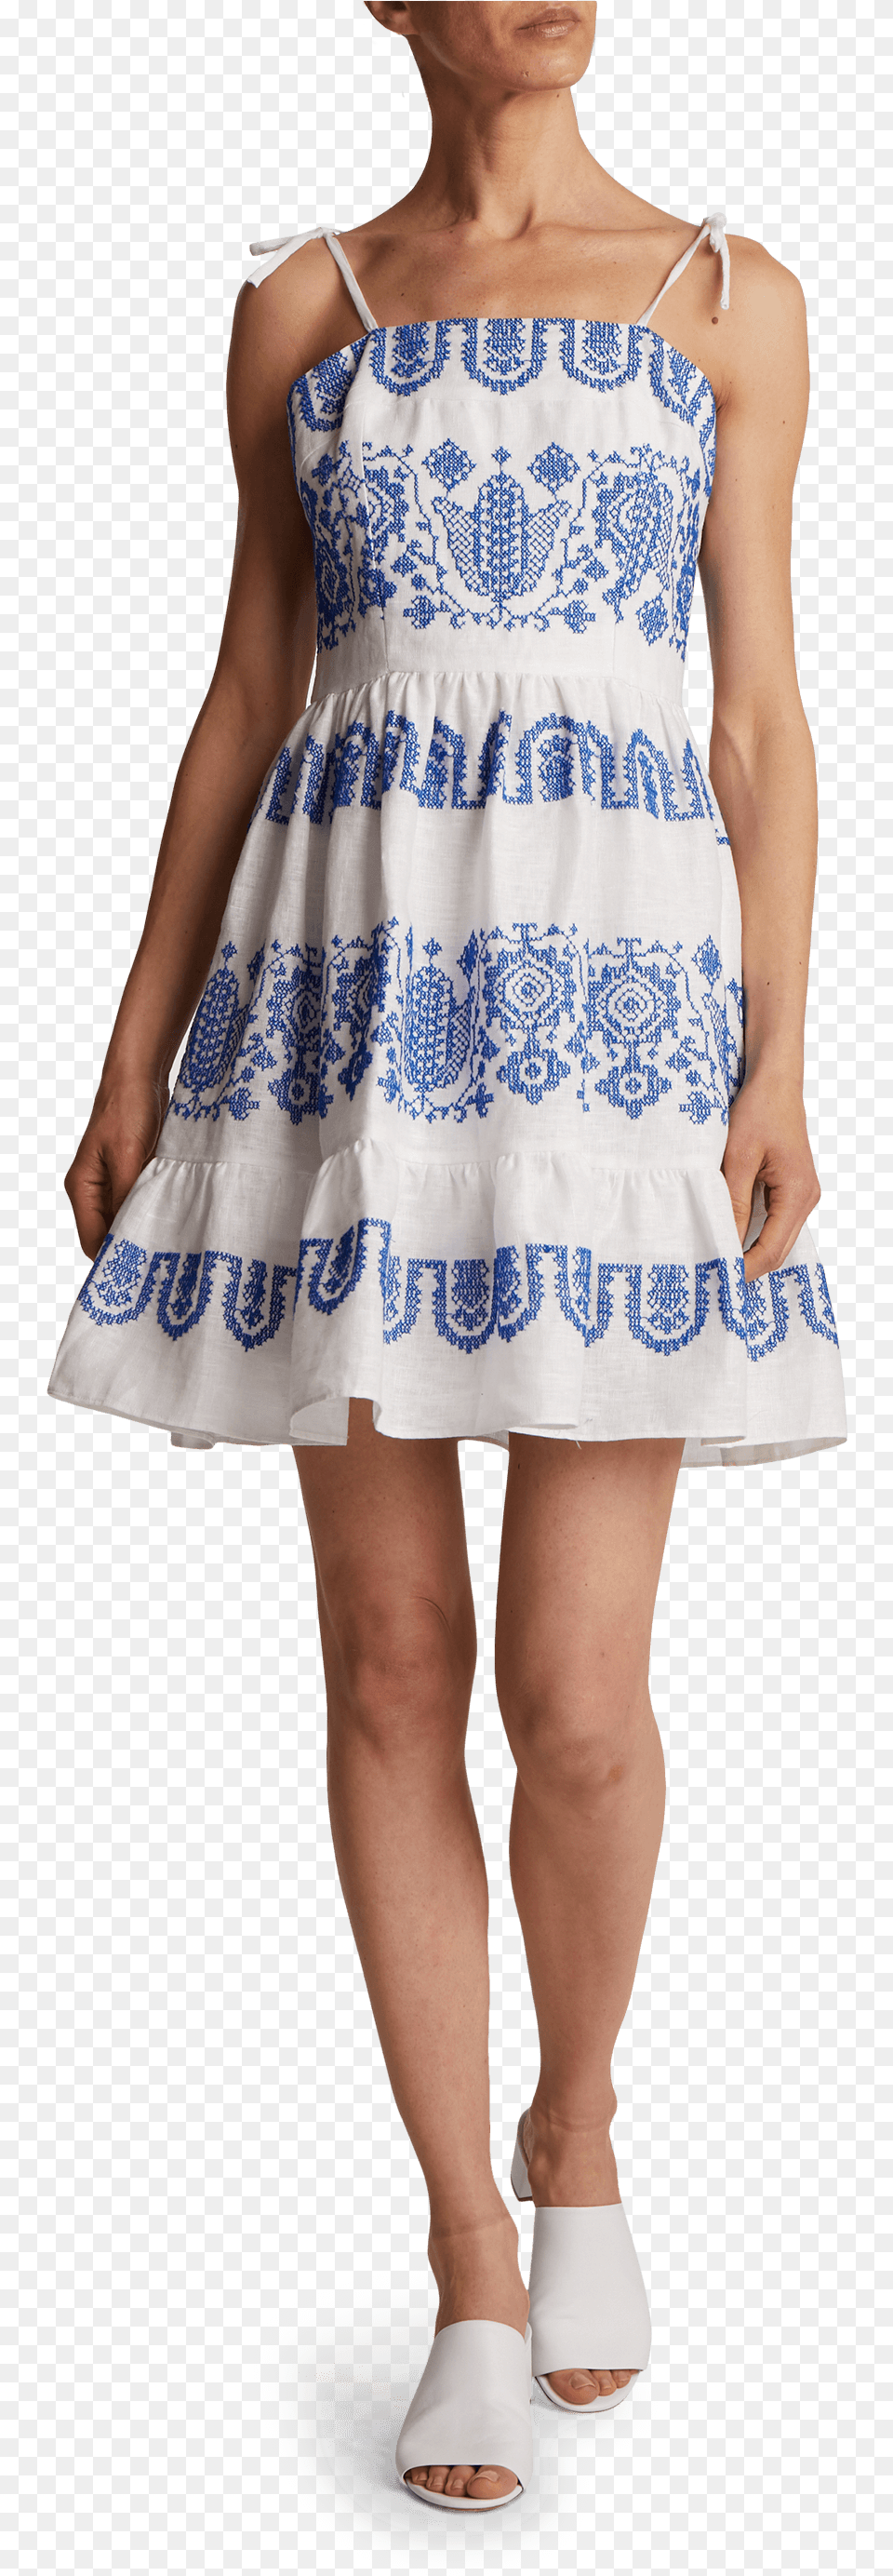 Item Primary Cocktail Dress, Clothing, Adult, Person, Woman Png Image